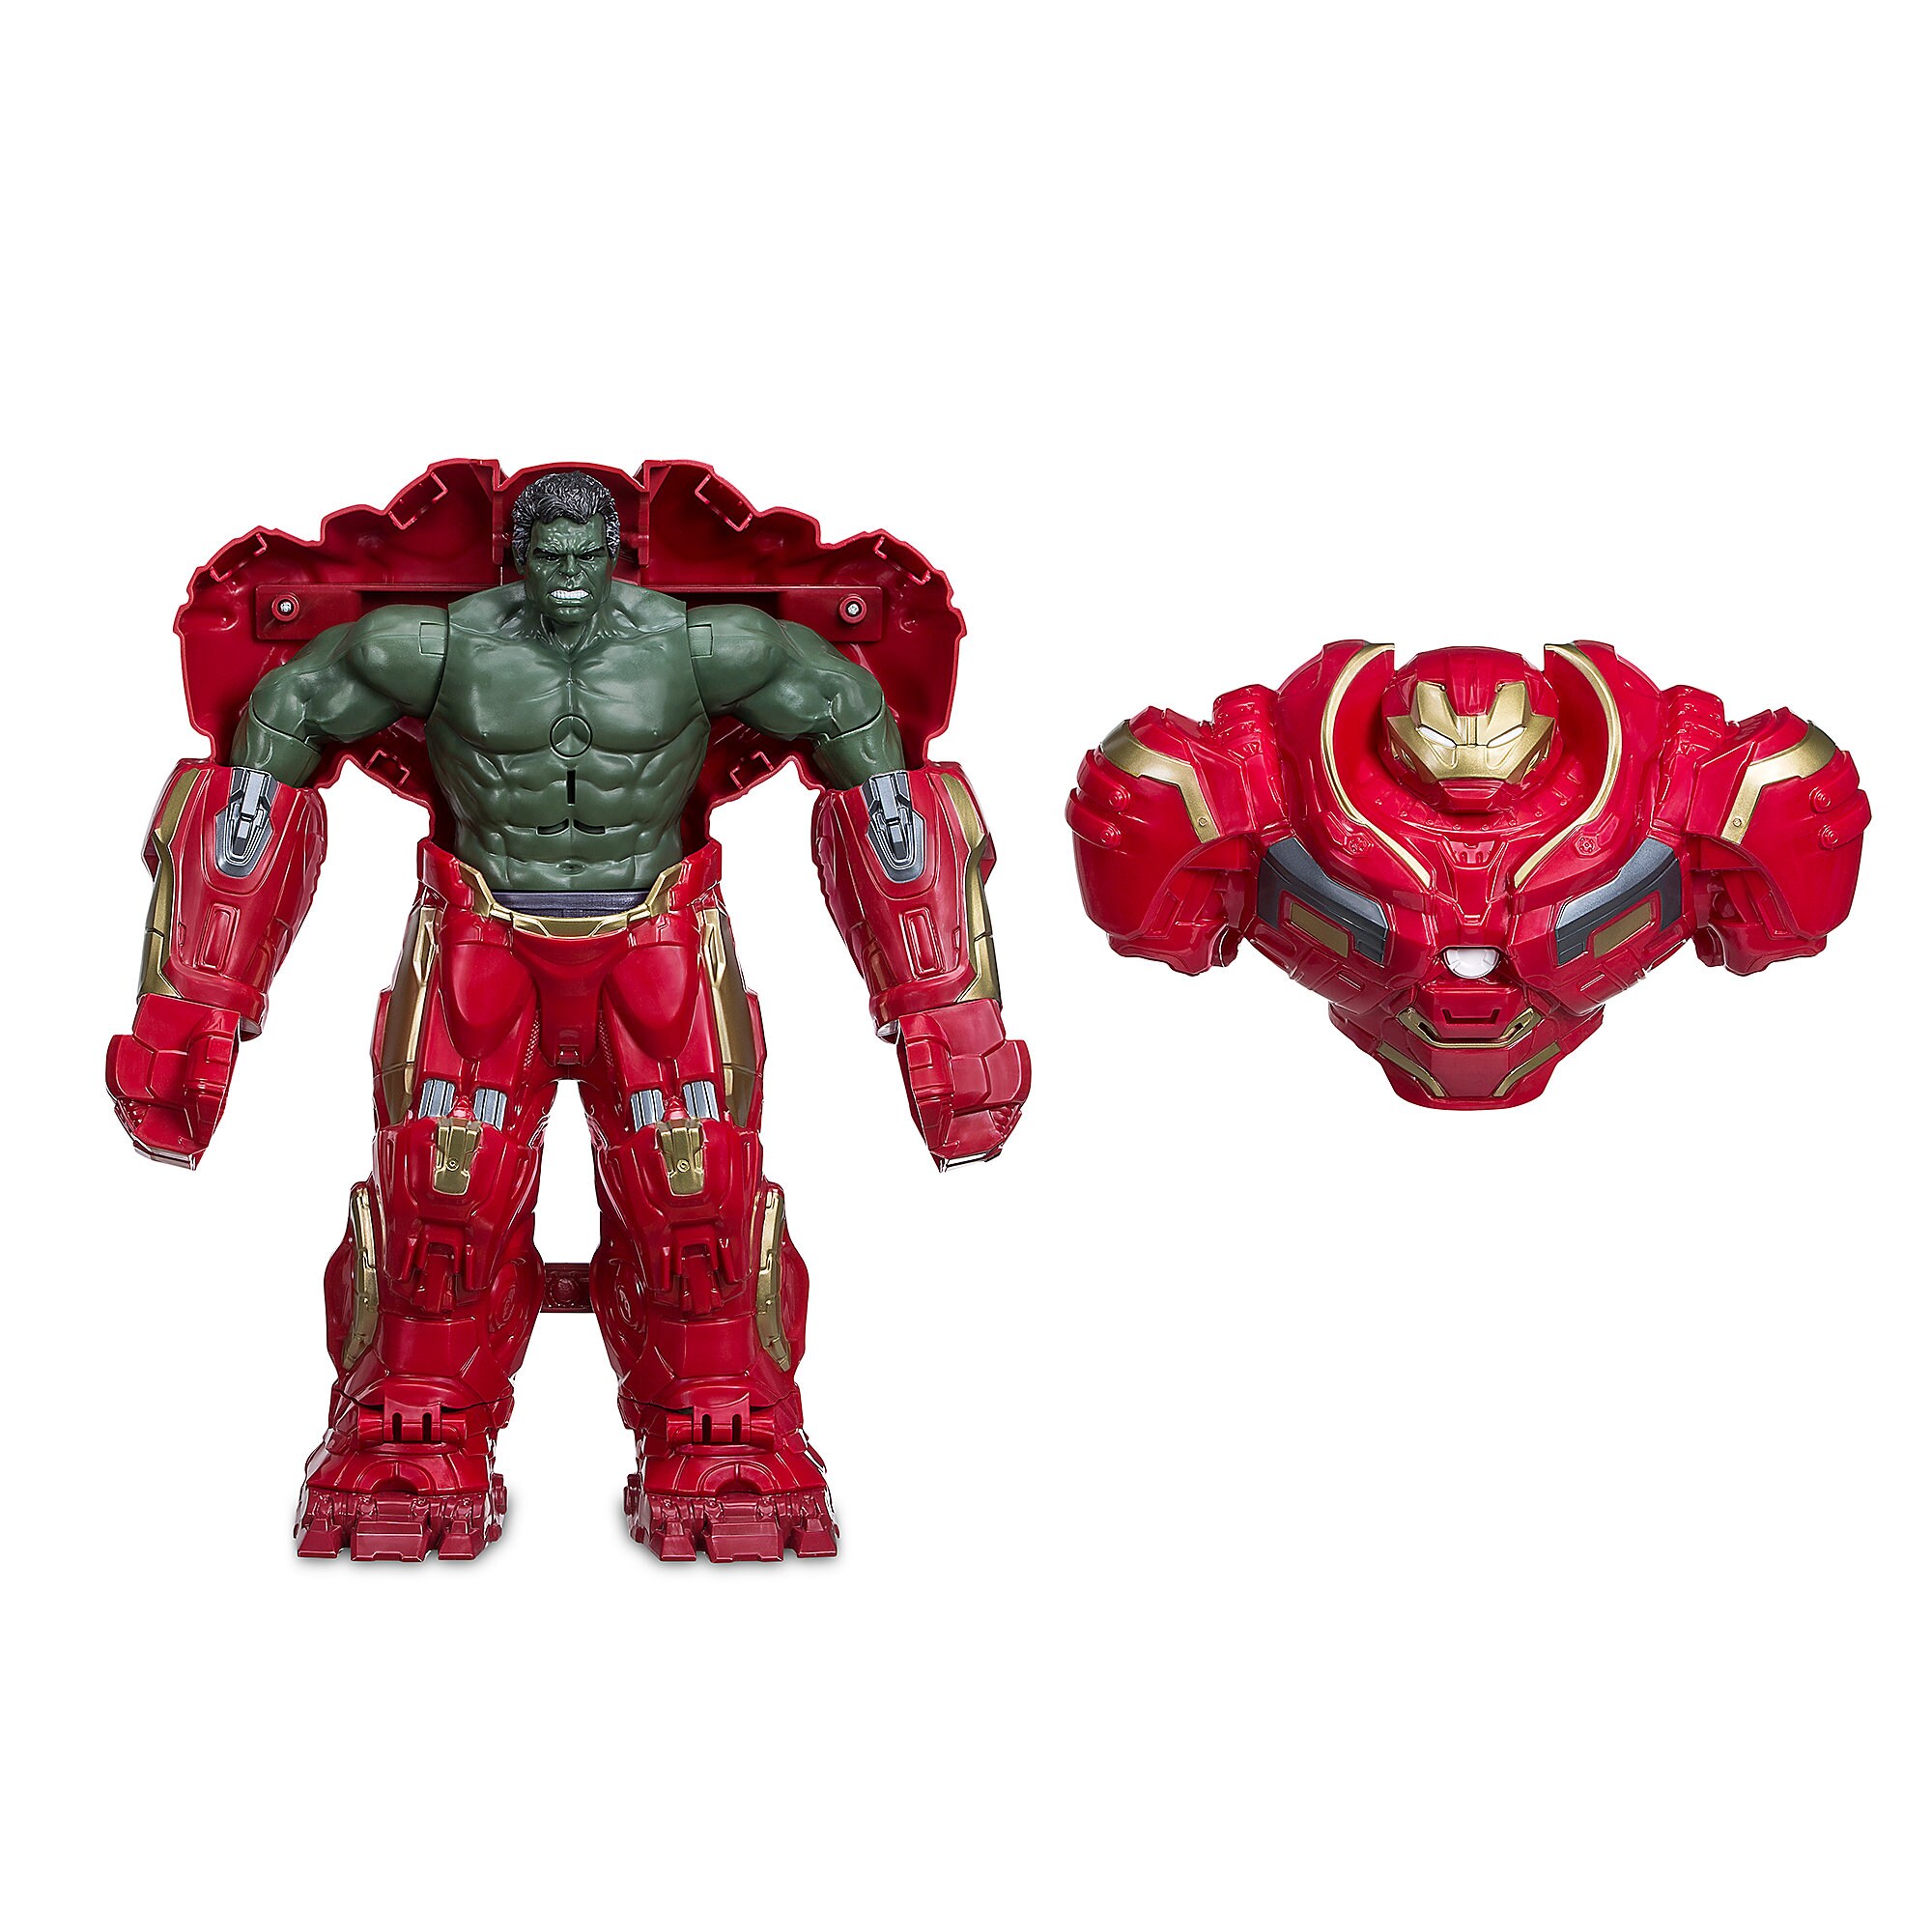 Hulk Out Hulkbuster Action Figure by Hasbro - Marvel's Avengers: Infinity War